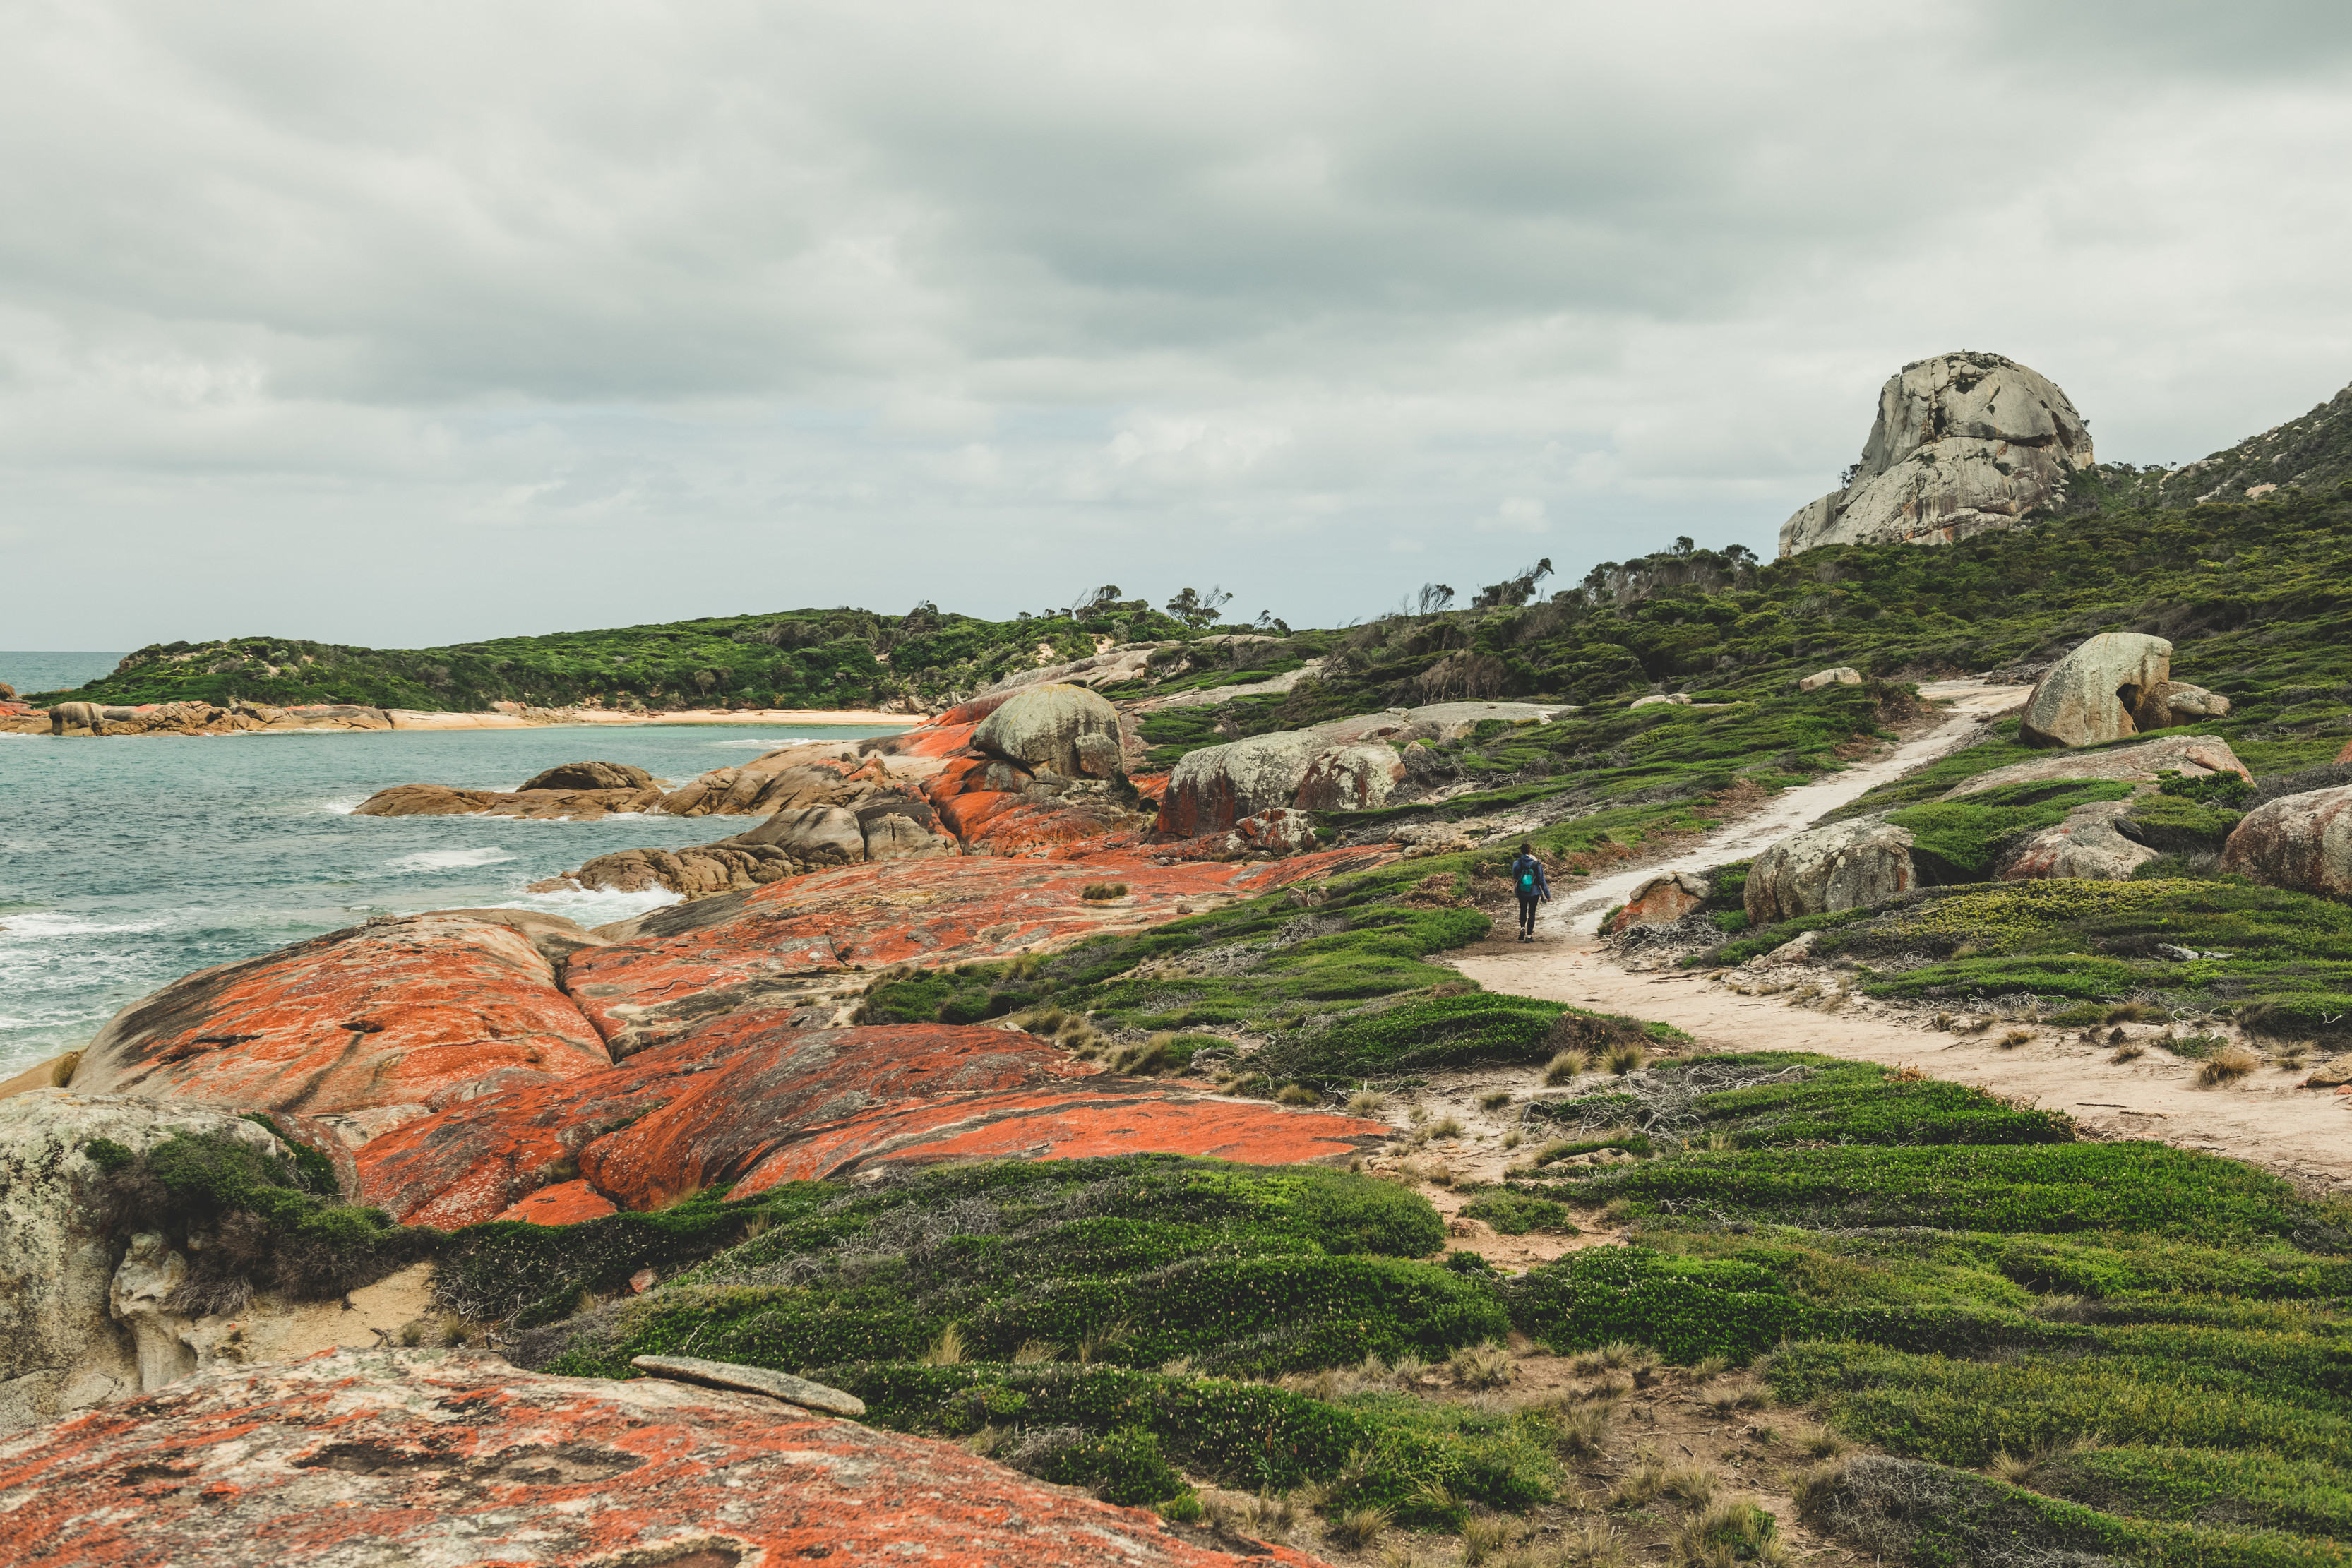 A surreal landscape of greens, oranges and blues. Person walking along Old Mans Head rock, Flinders Trail.